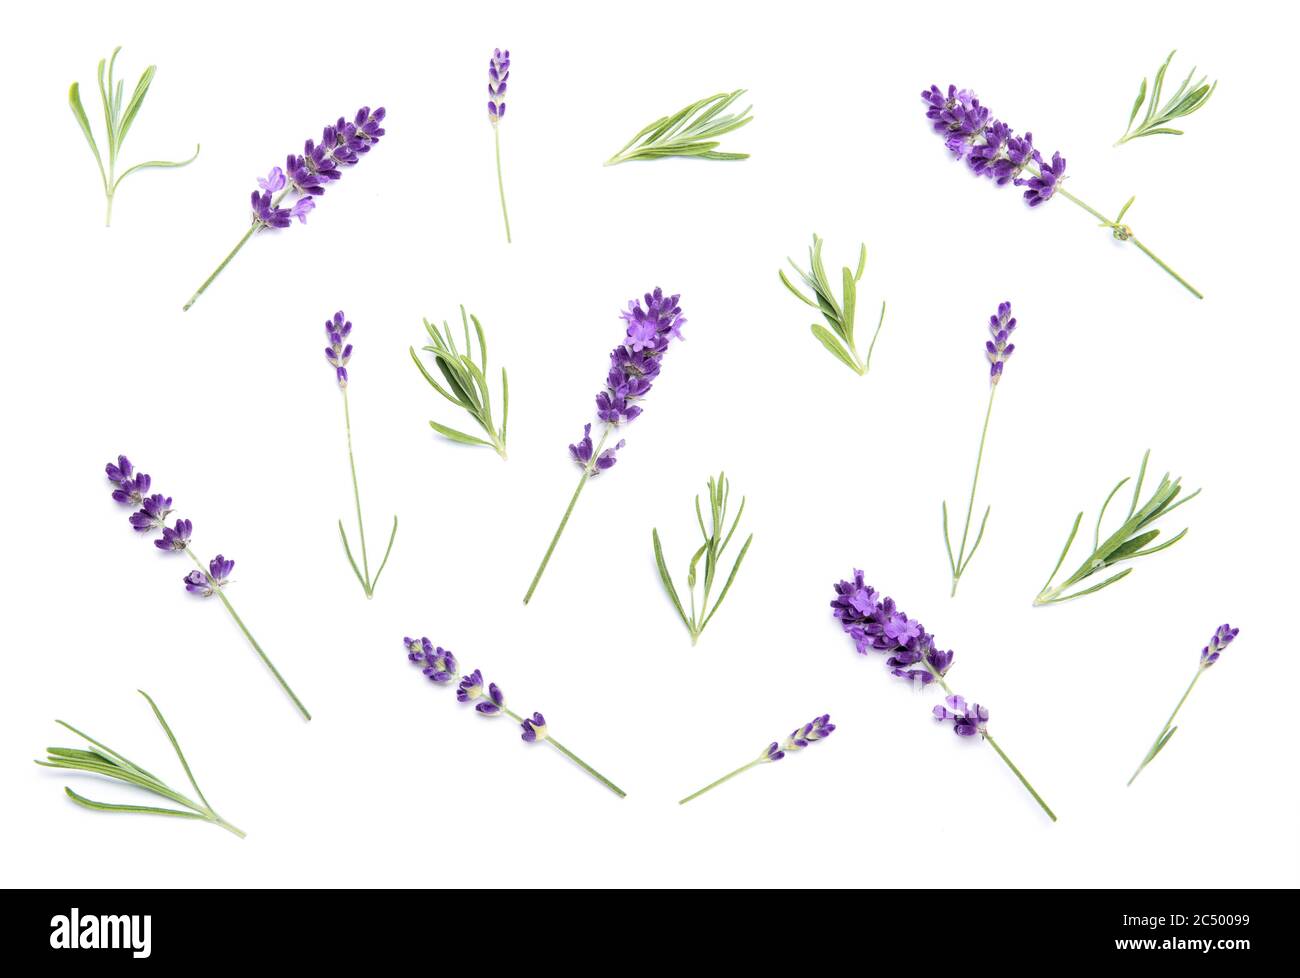 Lavender flowers on white. Floral background. Minimal concept Stock Photo